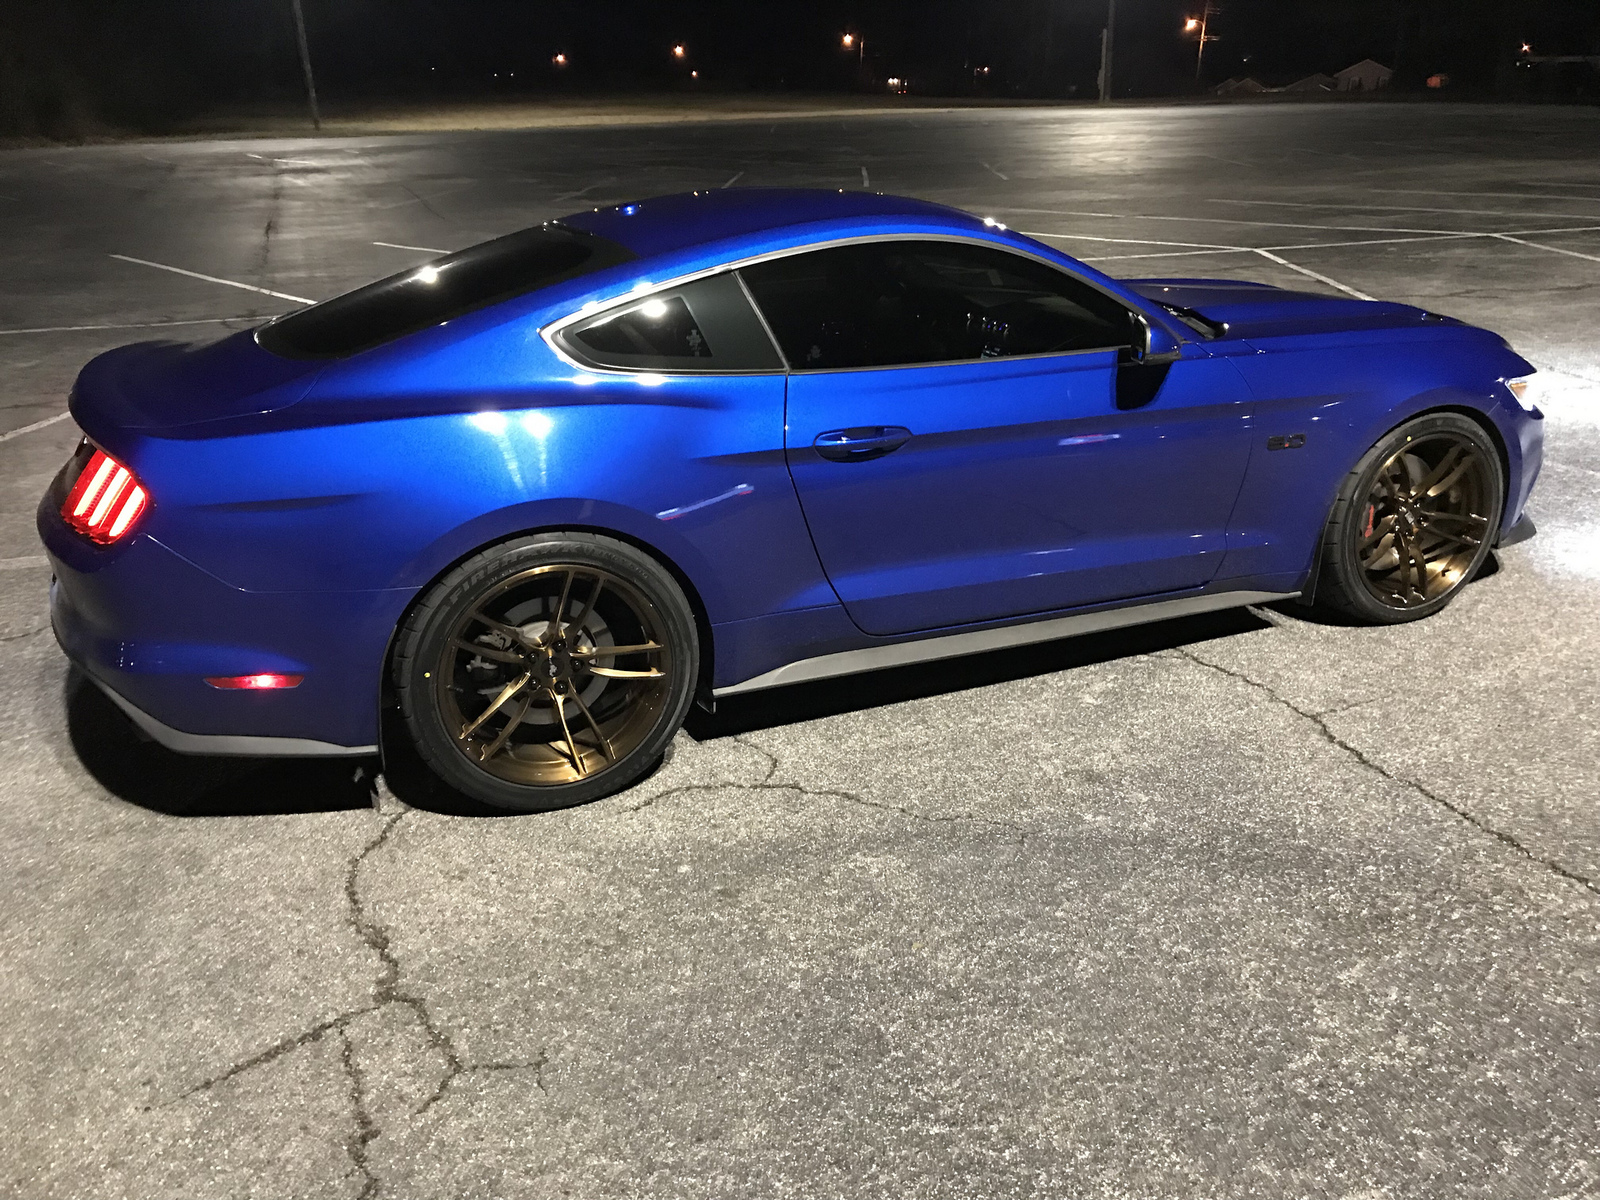 deep-impact-blue-ford-mustang-gtpp-s550-p51-101rf-brushed-bonze-concave-wheels.jpg